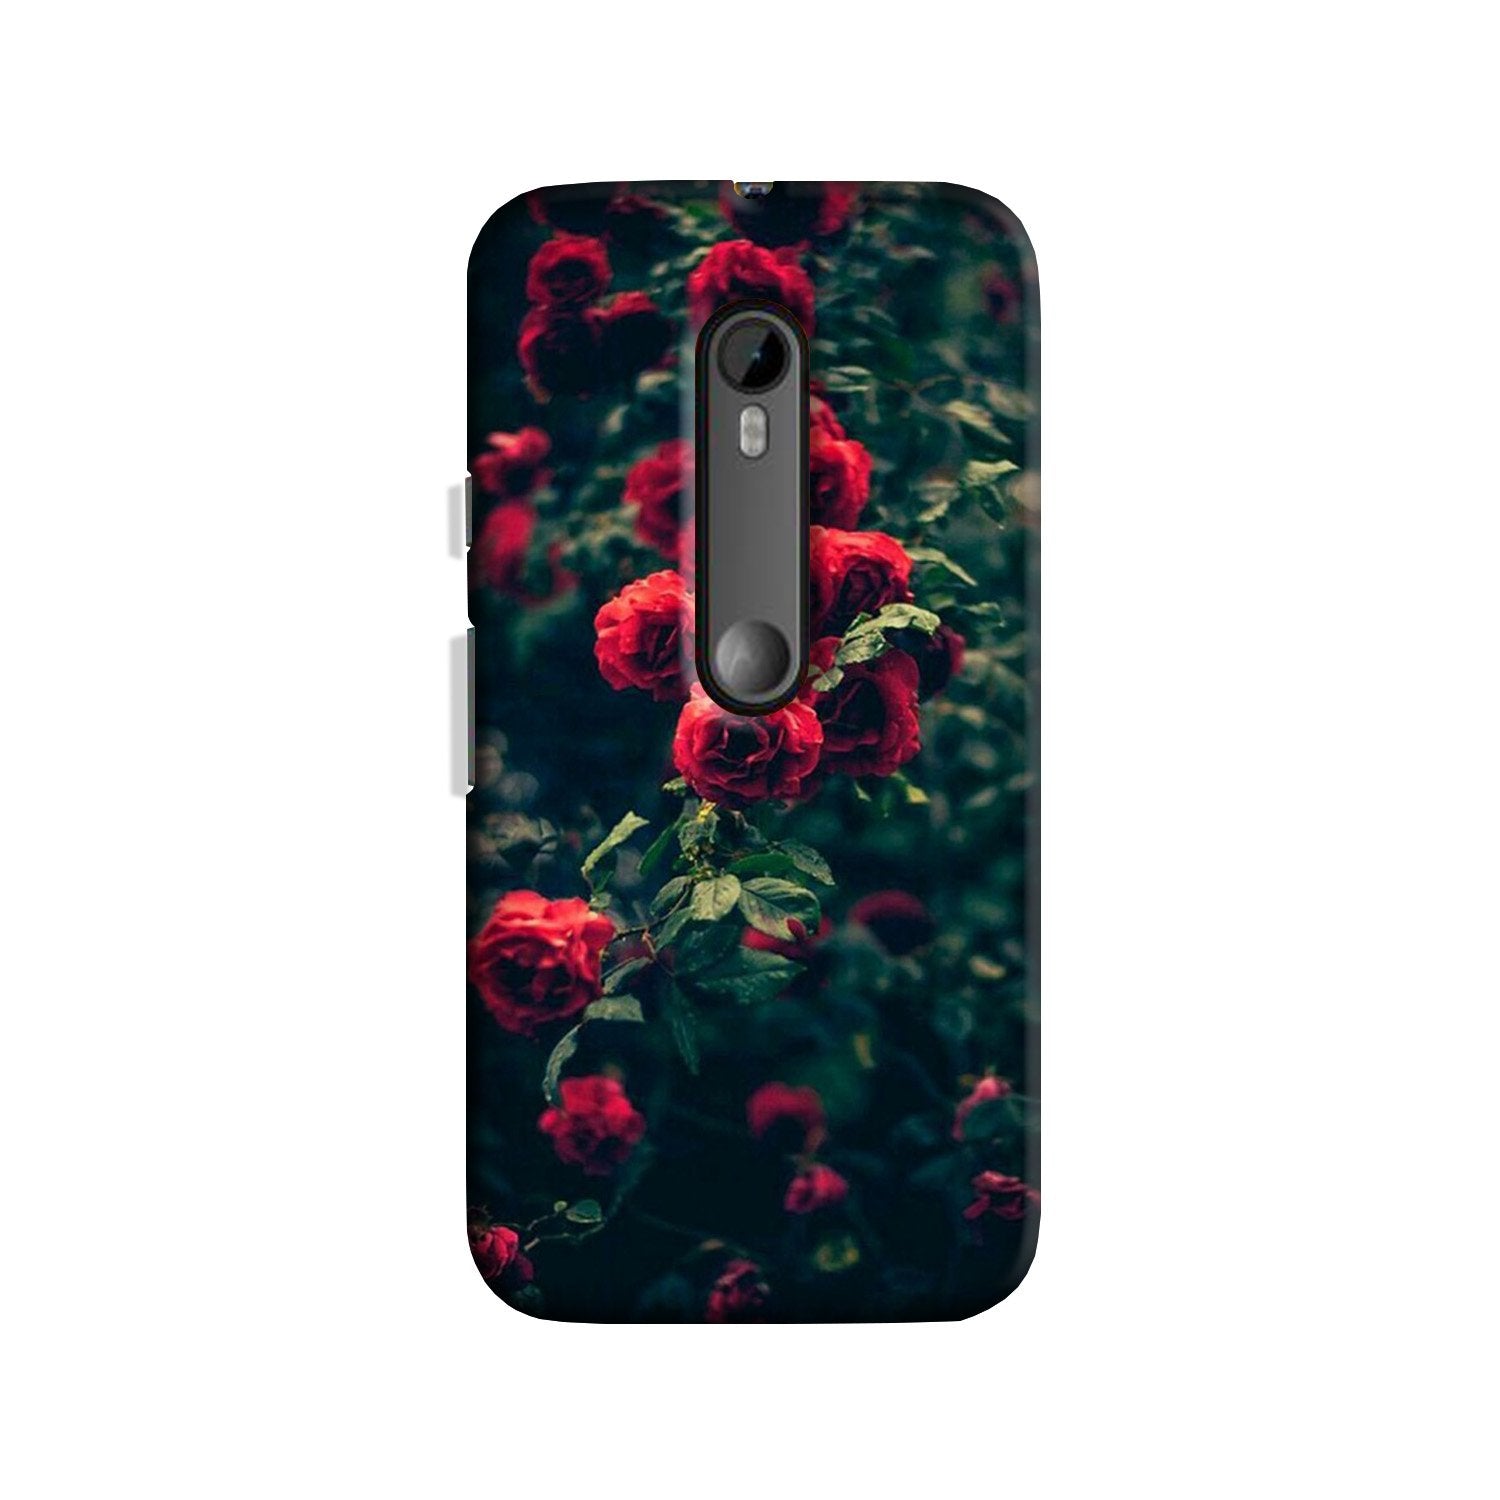 Red Rose Case for Moto X Force